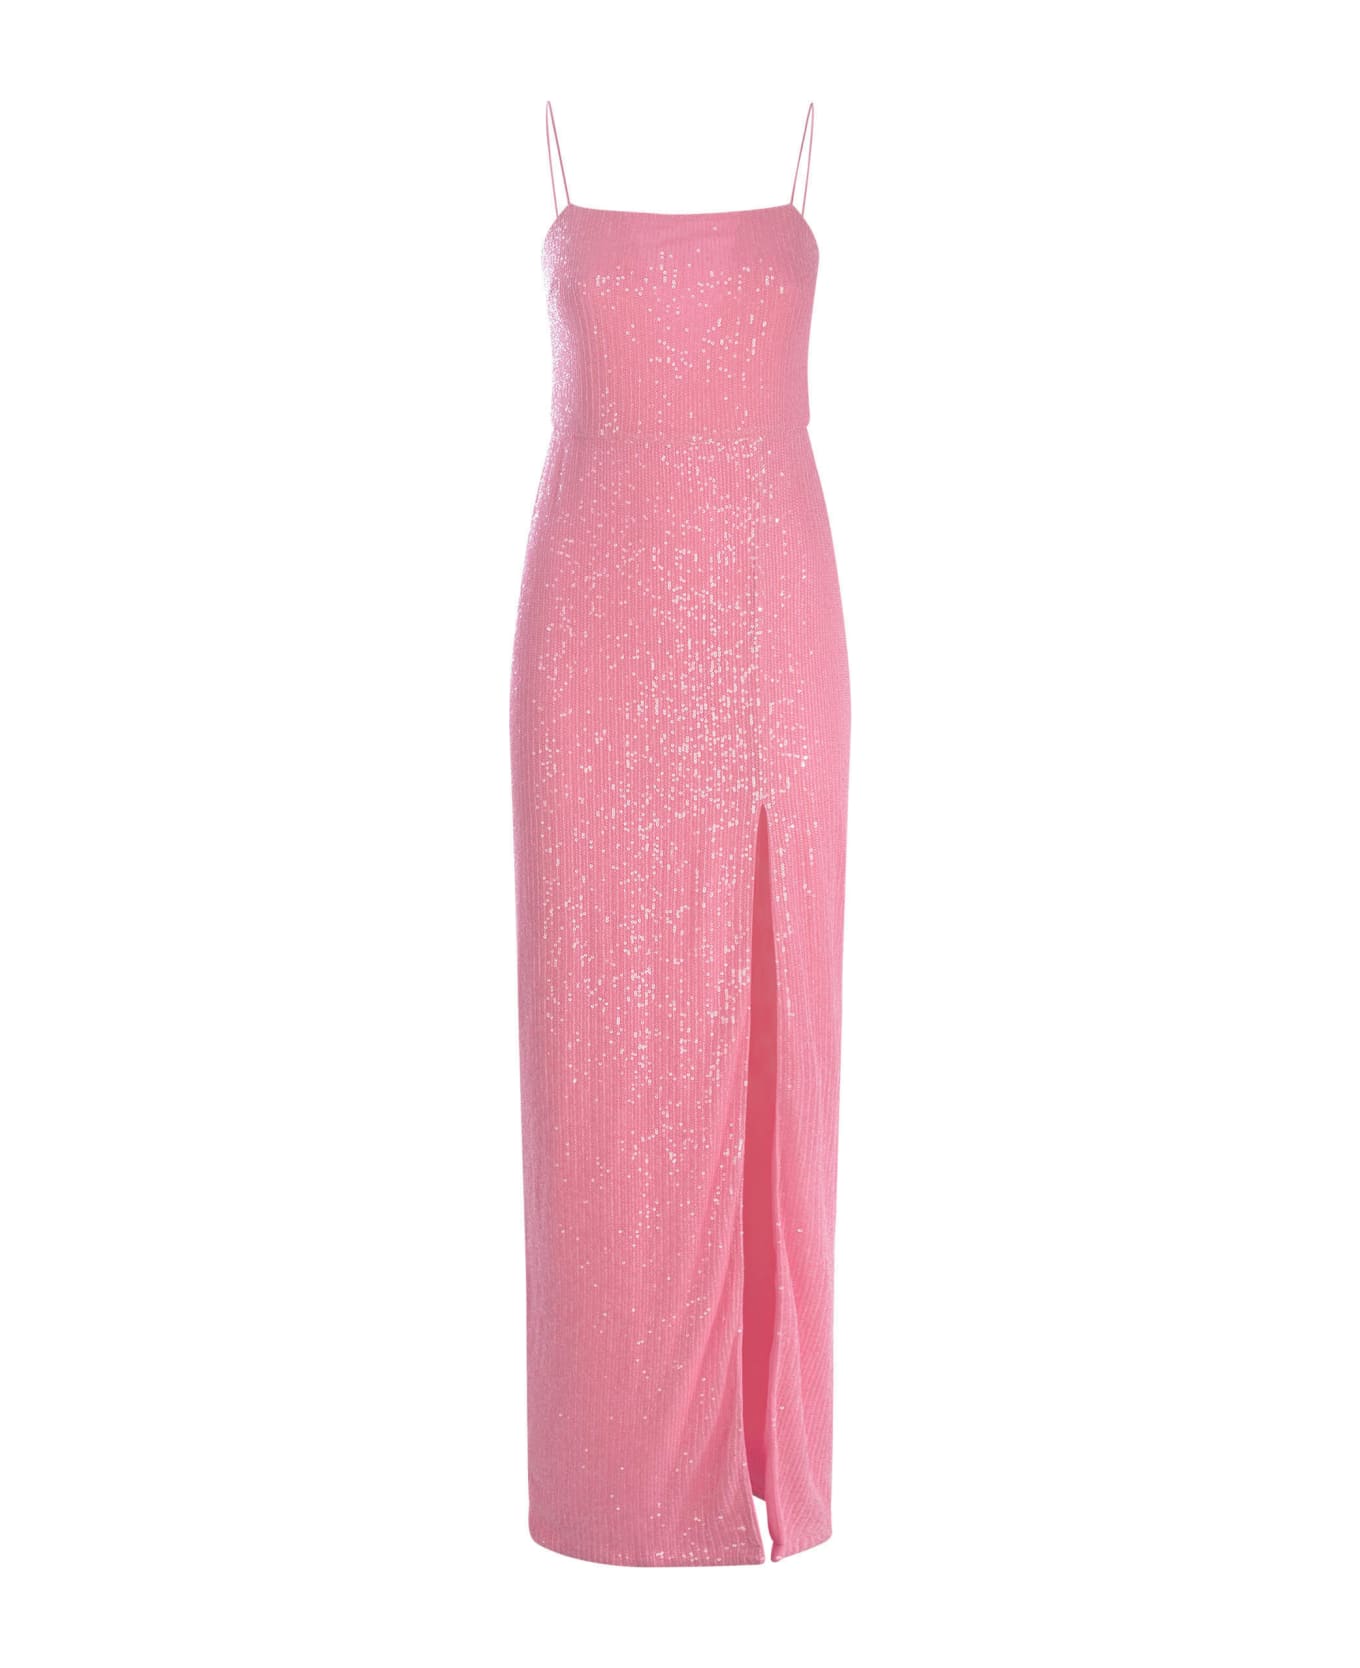 Rotate by Birger Christensen Long Dress Rotate "begonia Pink" In Micro Sequins - Rosa